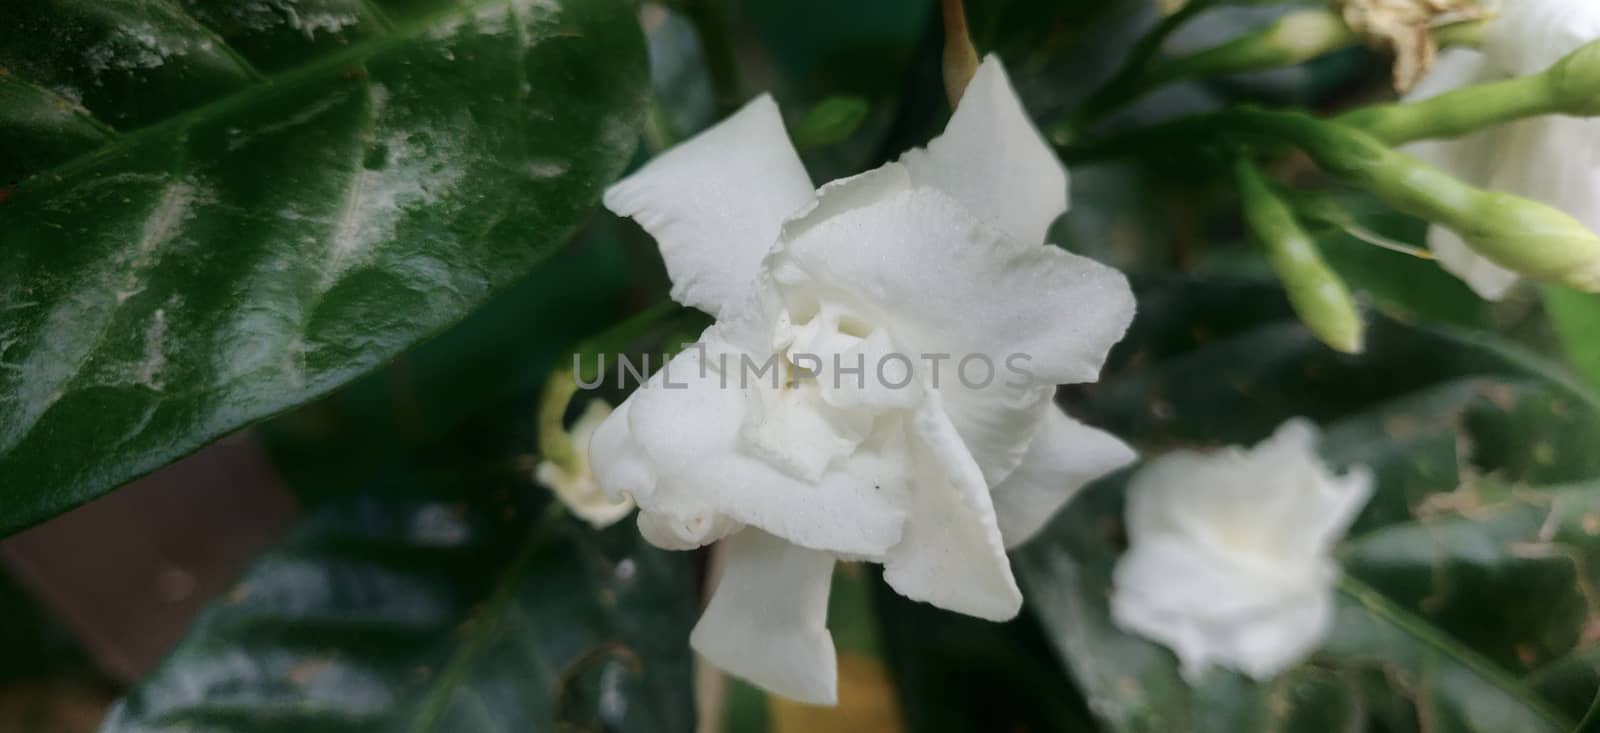 White flower, crepe Jasmine in full bloom in closeup in India during summers